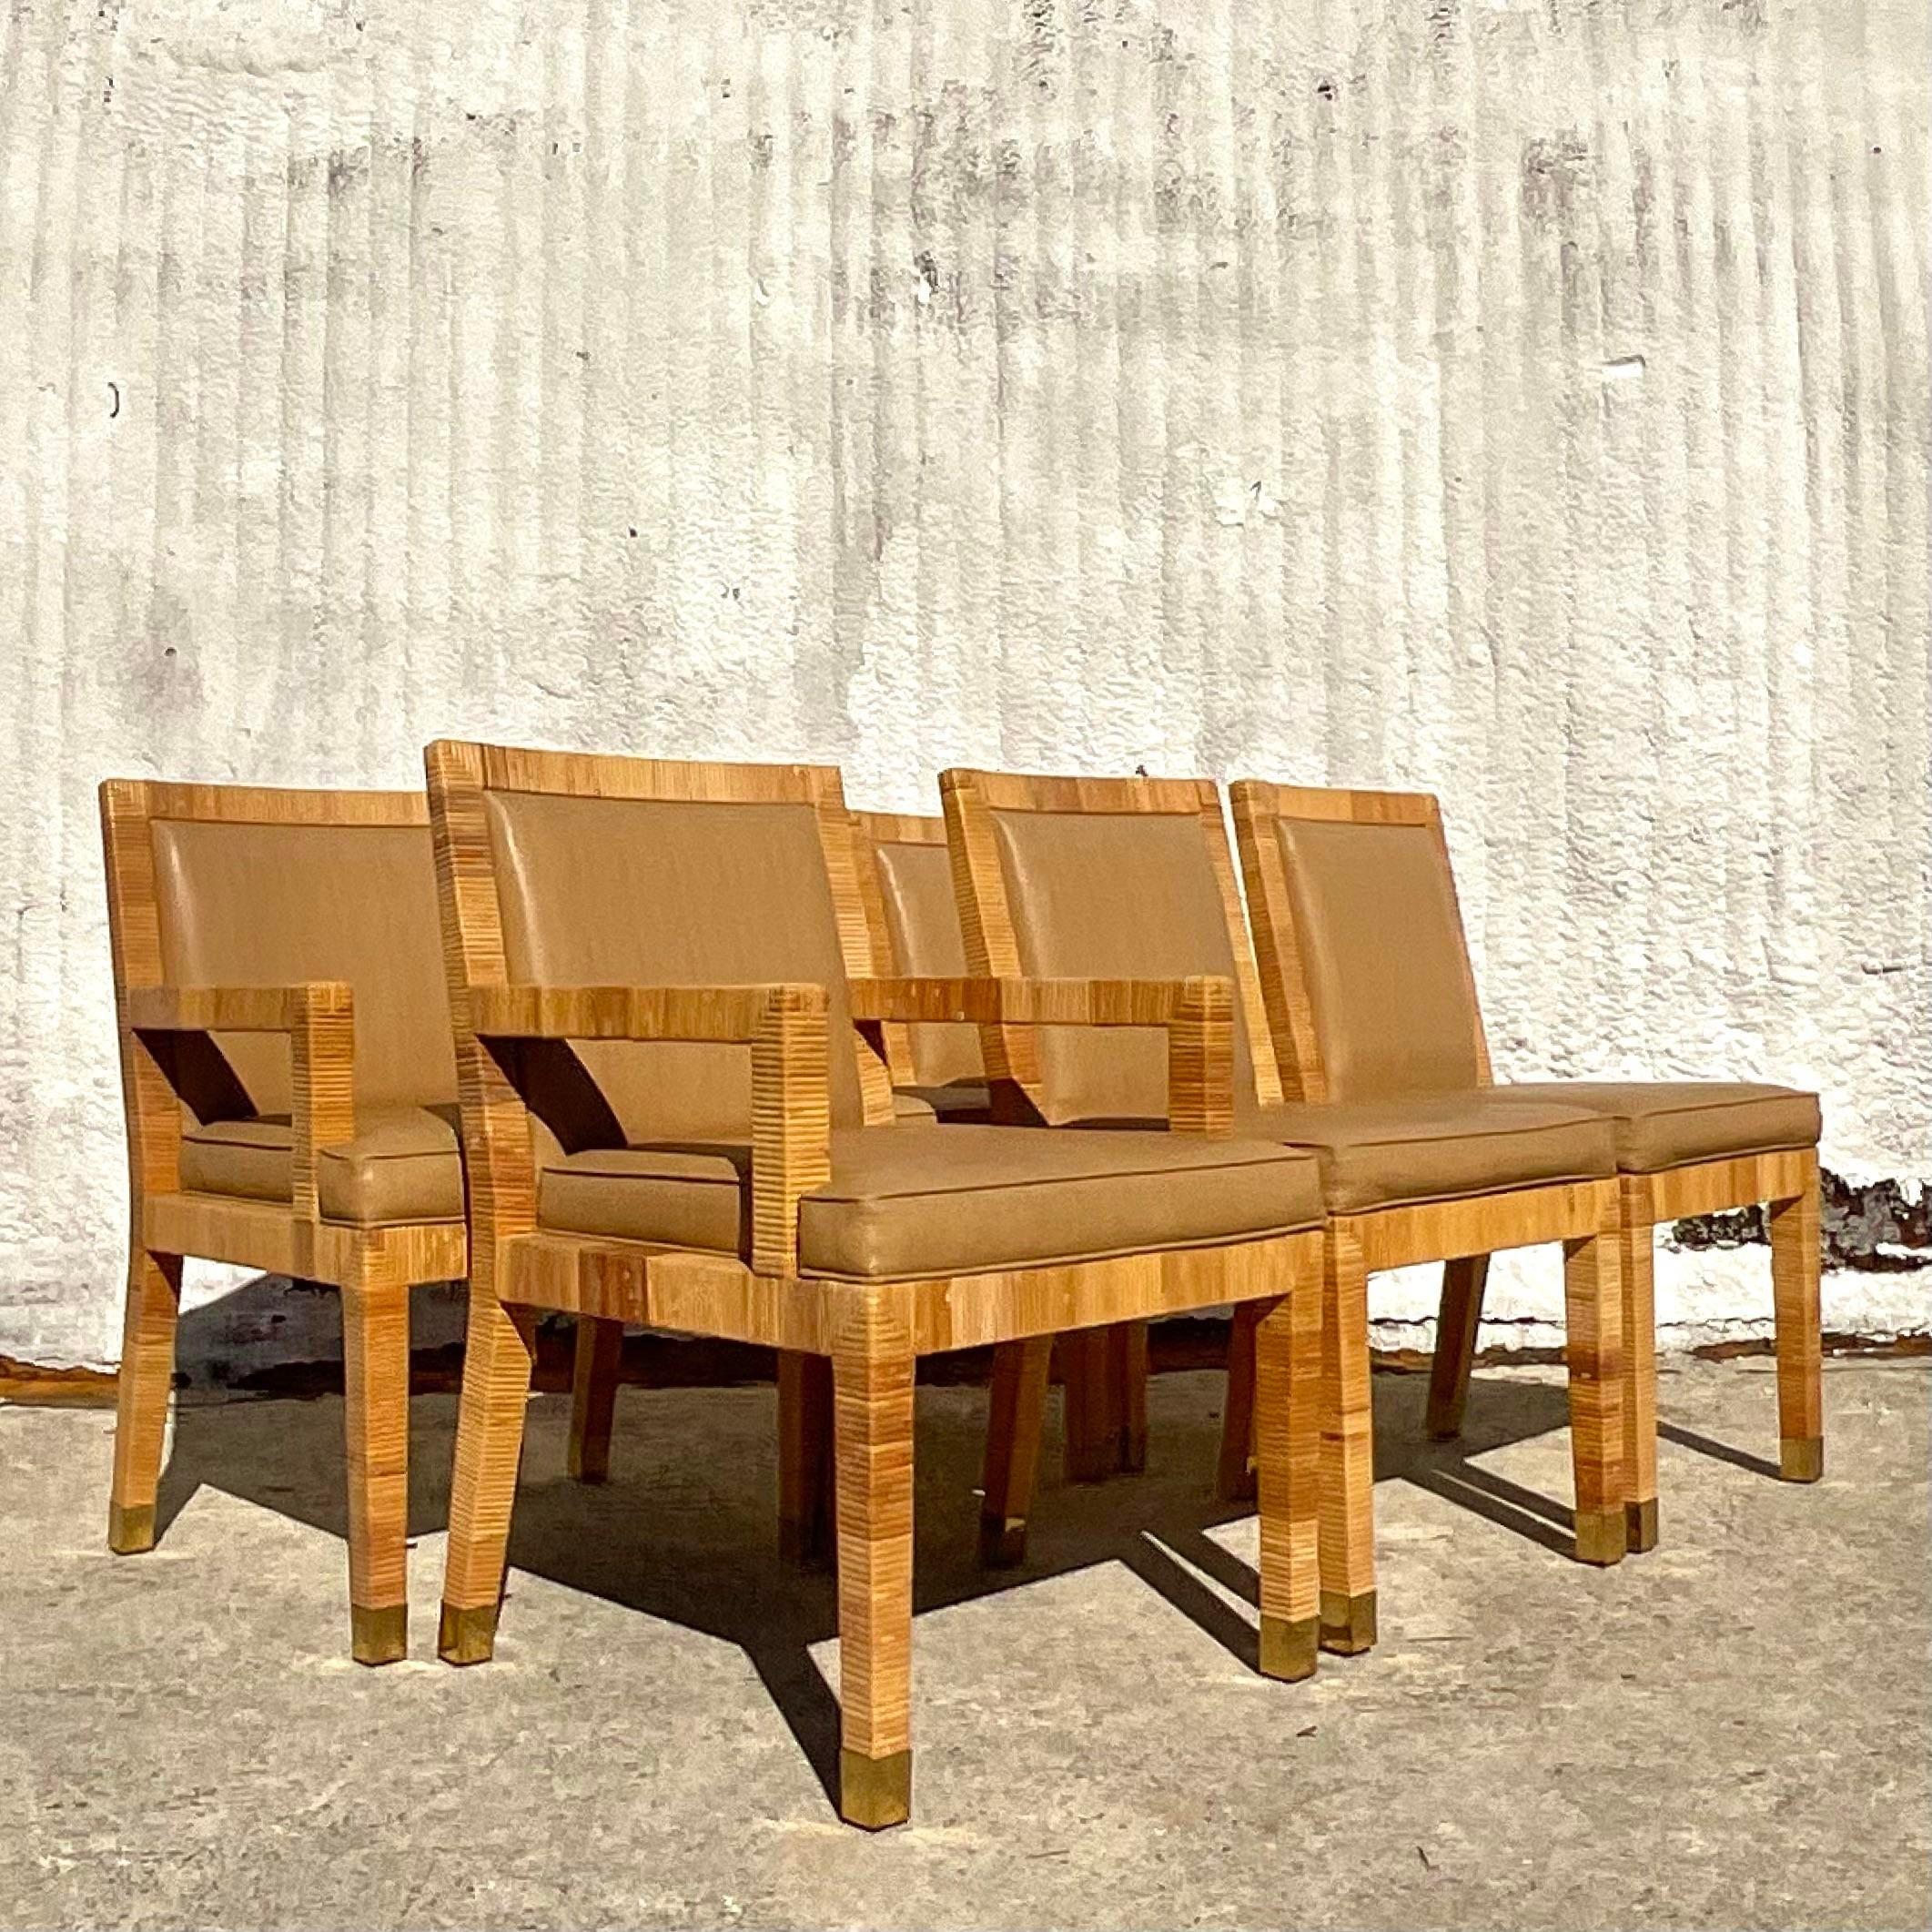 Vintage Coastal Bielecky Brothers Wrapped Rattan Dining Chairs - Set of 6 For Sale 6